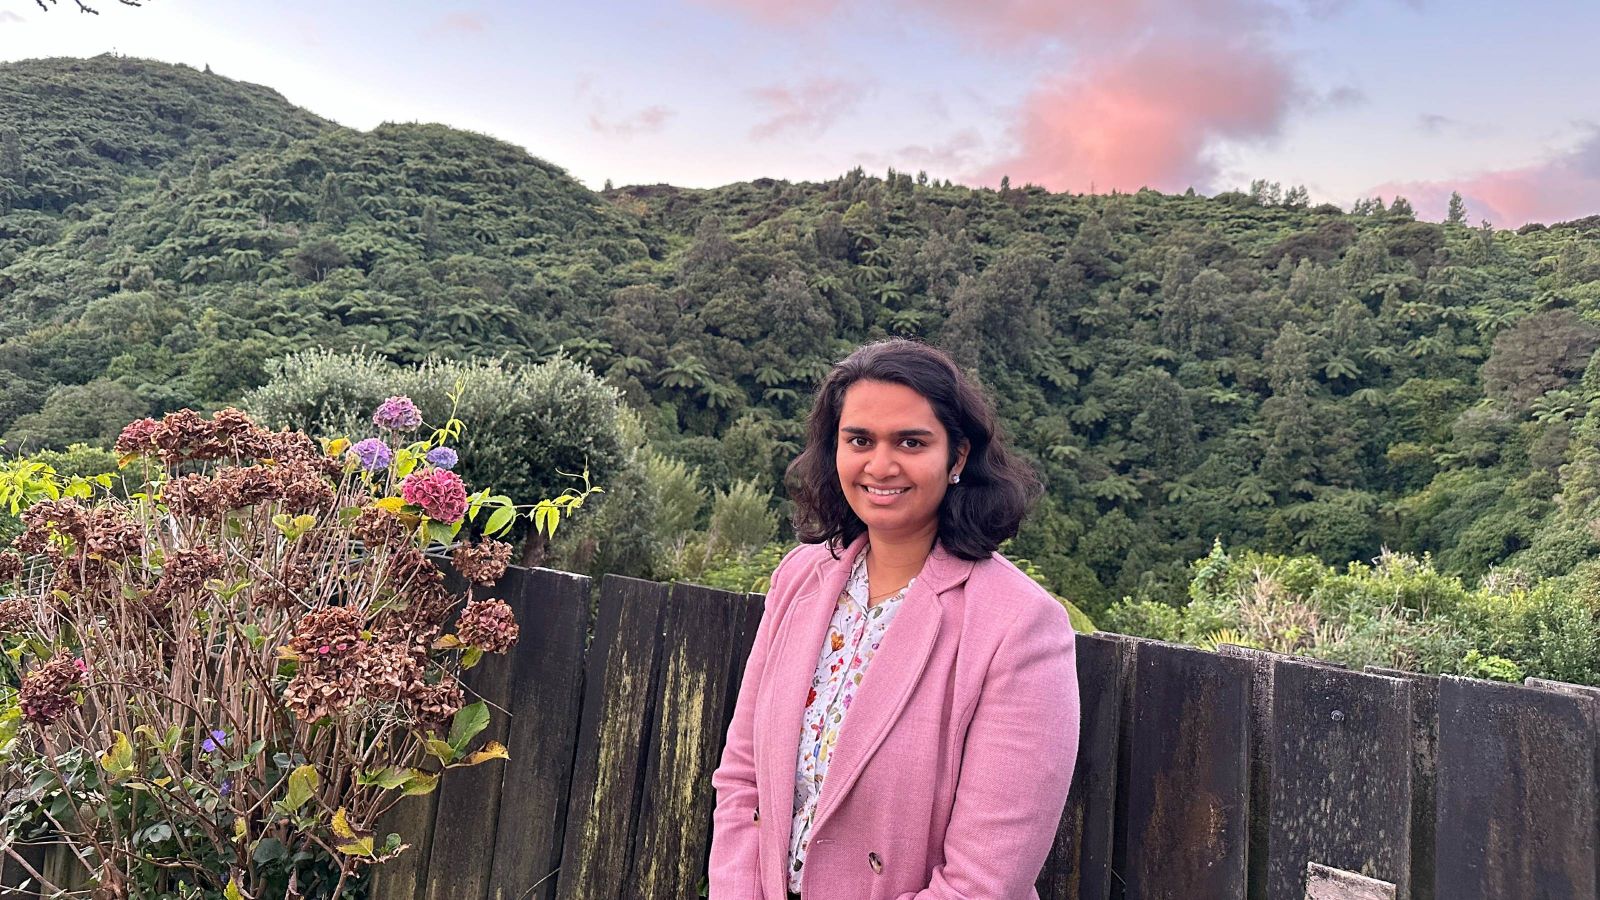 Photo of Ushana Jayasuriya. Ushana wears a pink blazer and smiles at the camera. Ushana stands in front of a fence. In the background is a forested hill.